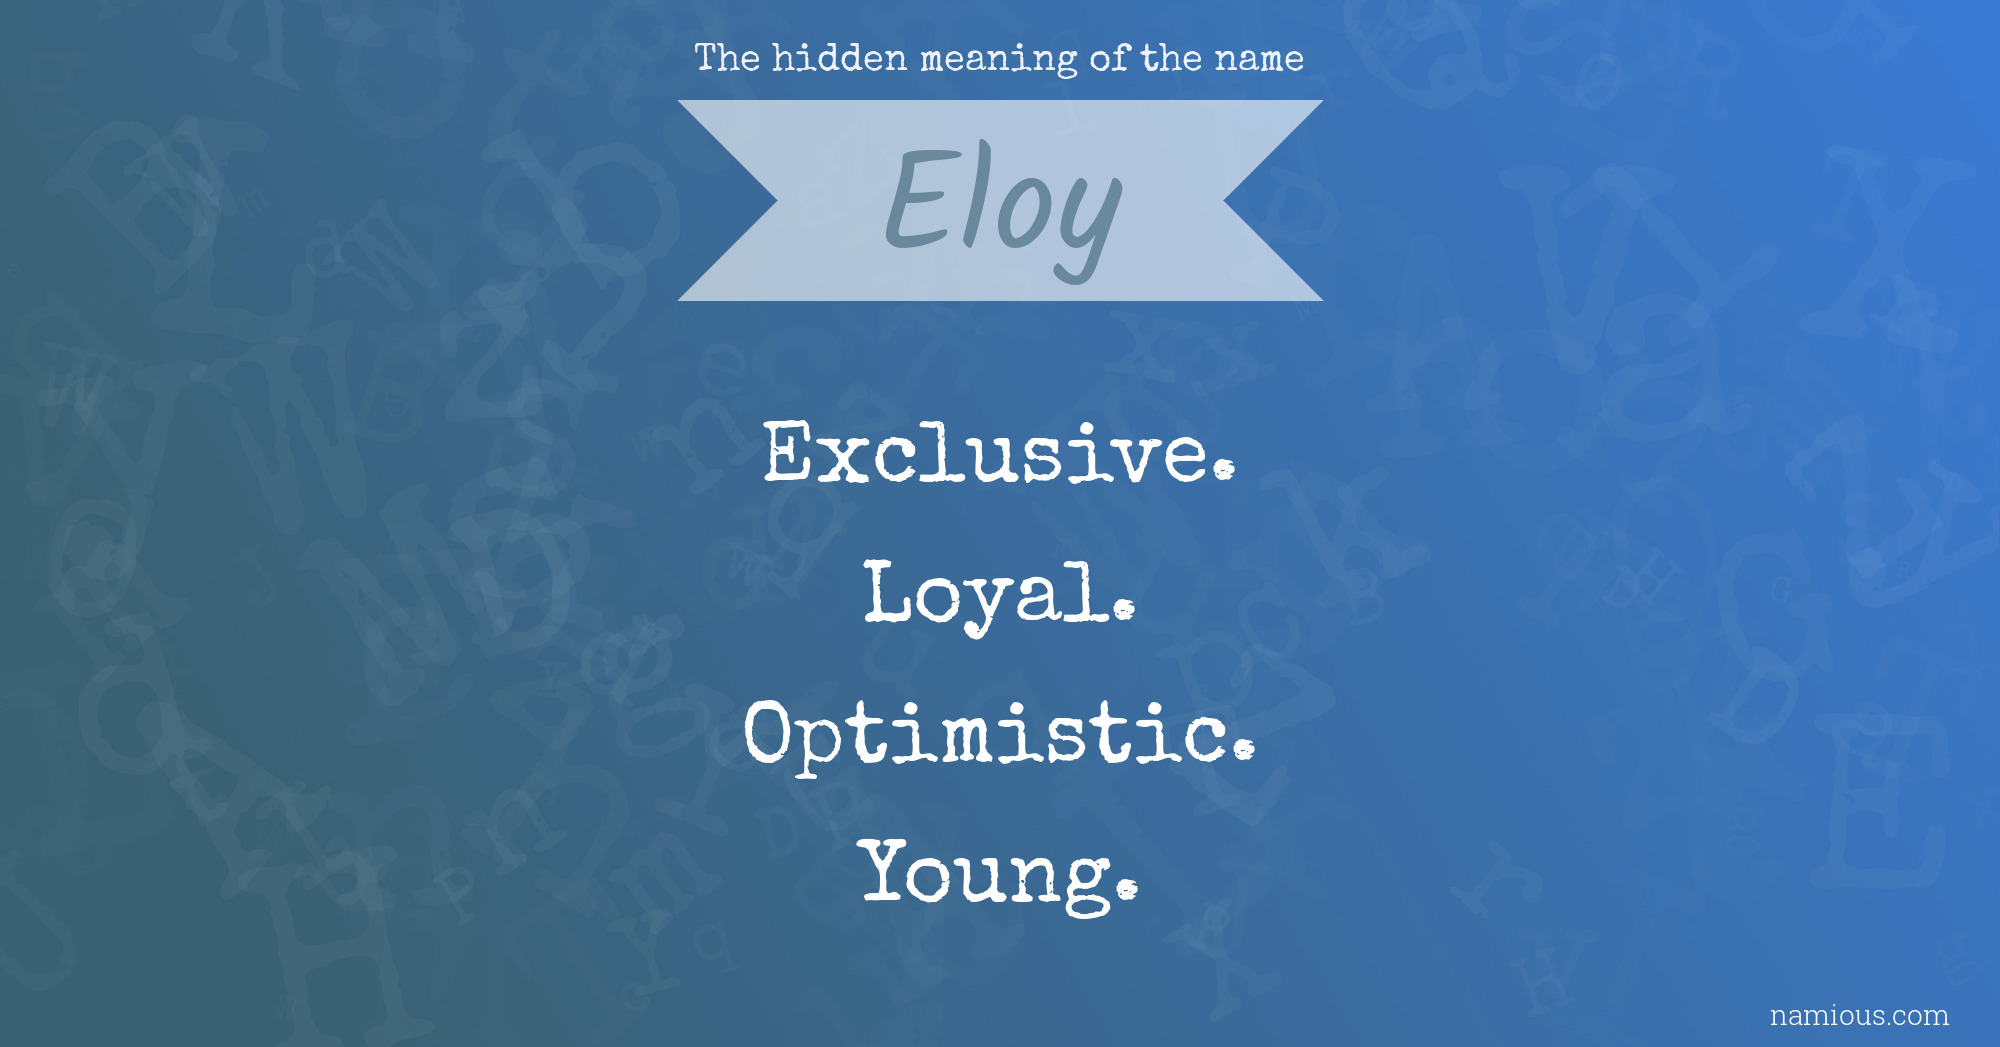 The hidden meaning of the name Eloy